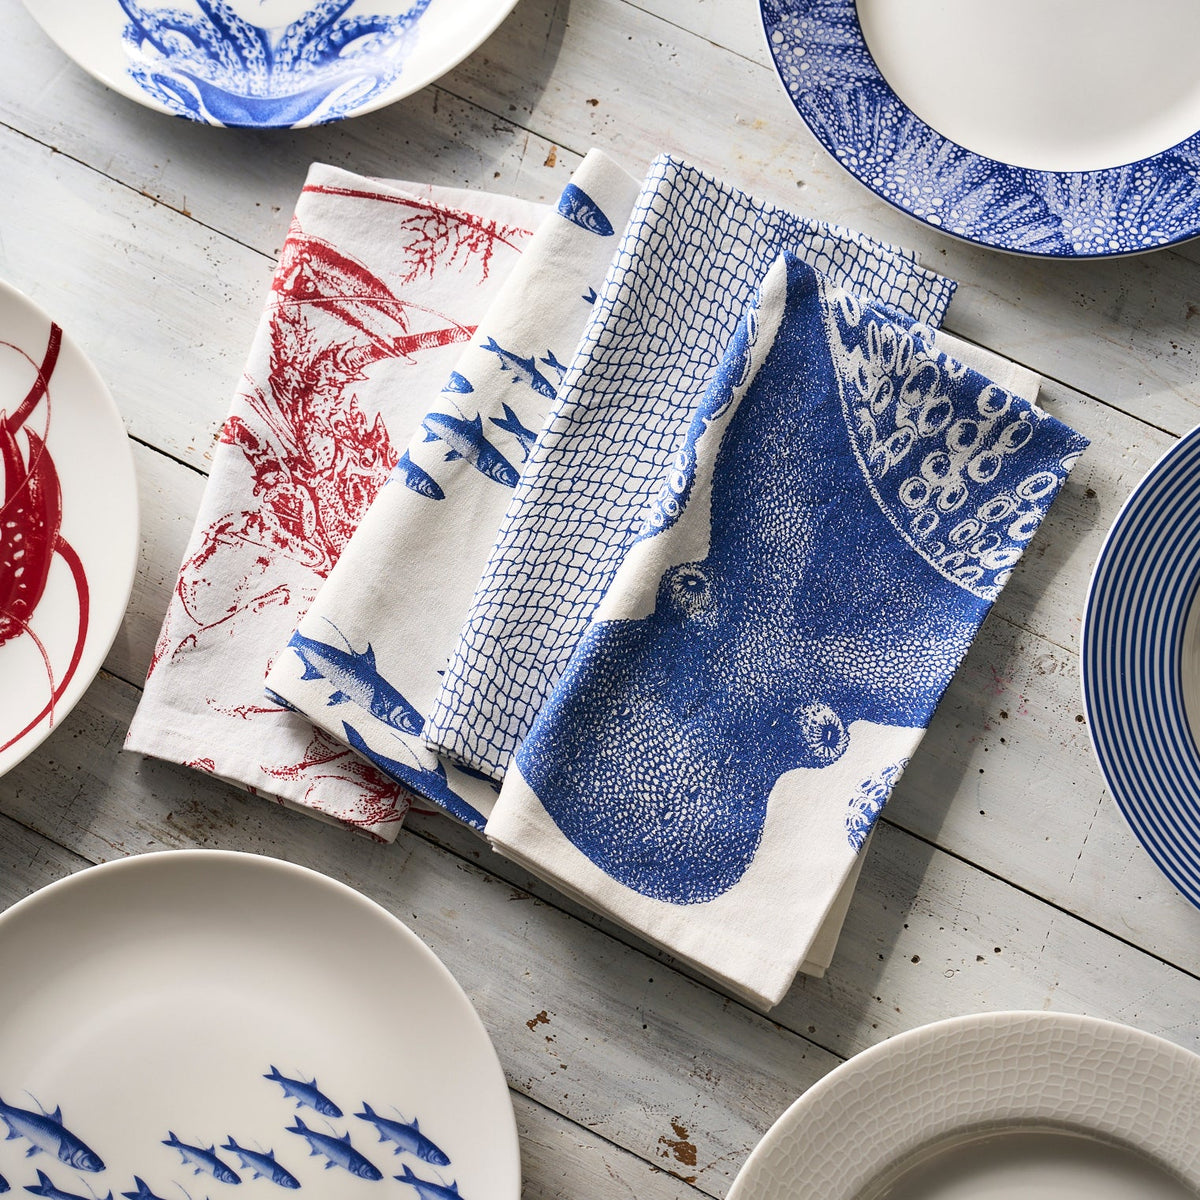 Blue and red patterned ceramic dinnerware collection and folded 100% cotton textiles on a wooden table with the Caskata School of Fish Dinner Napkins, Set of 4.